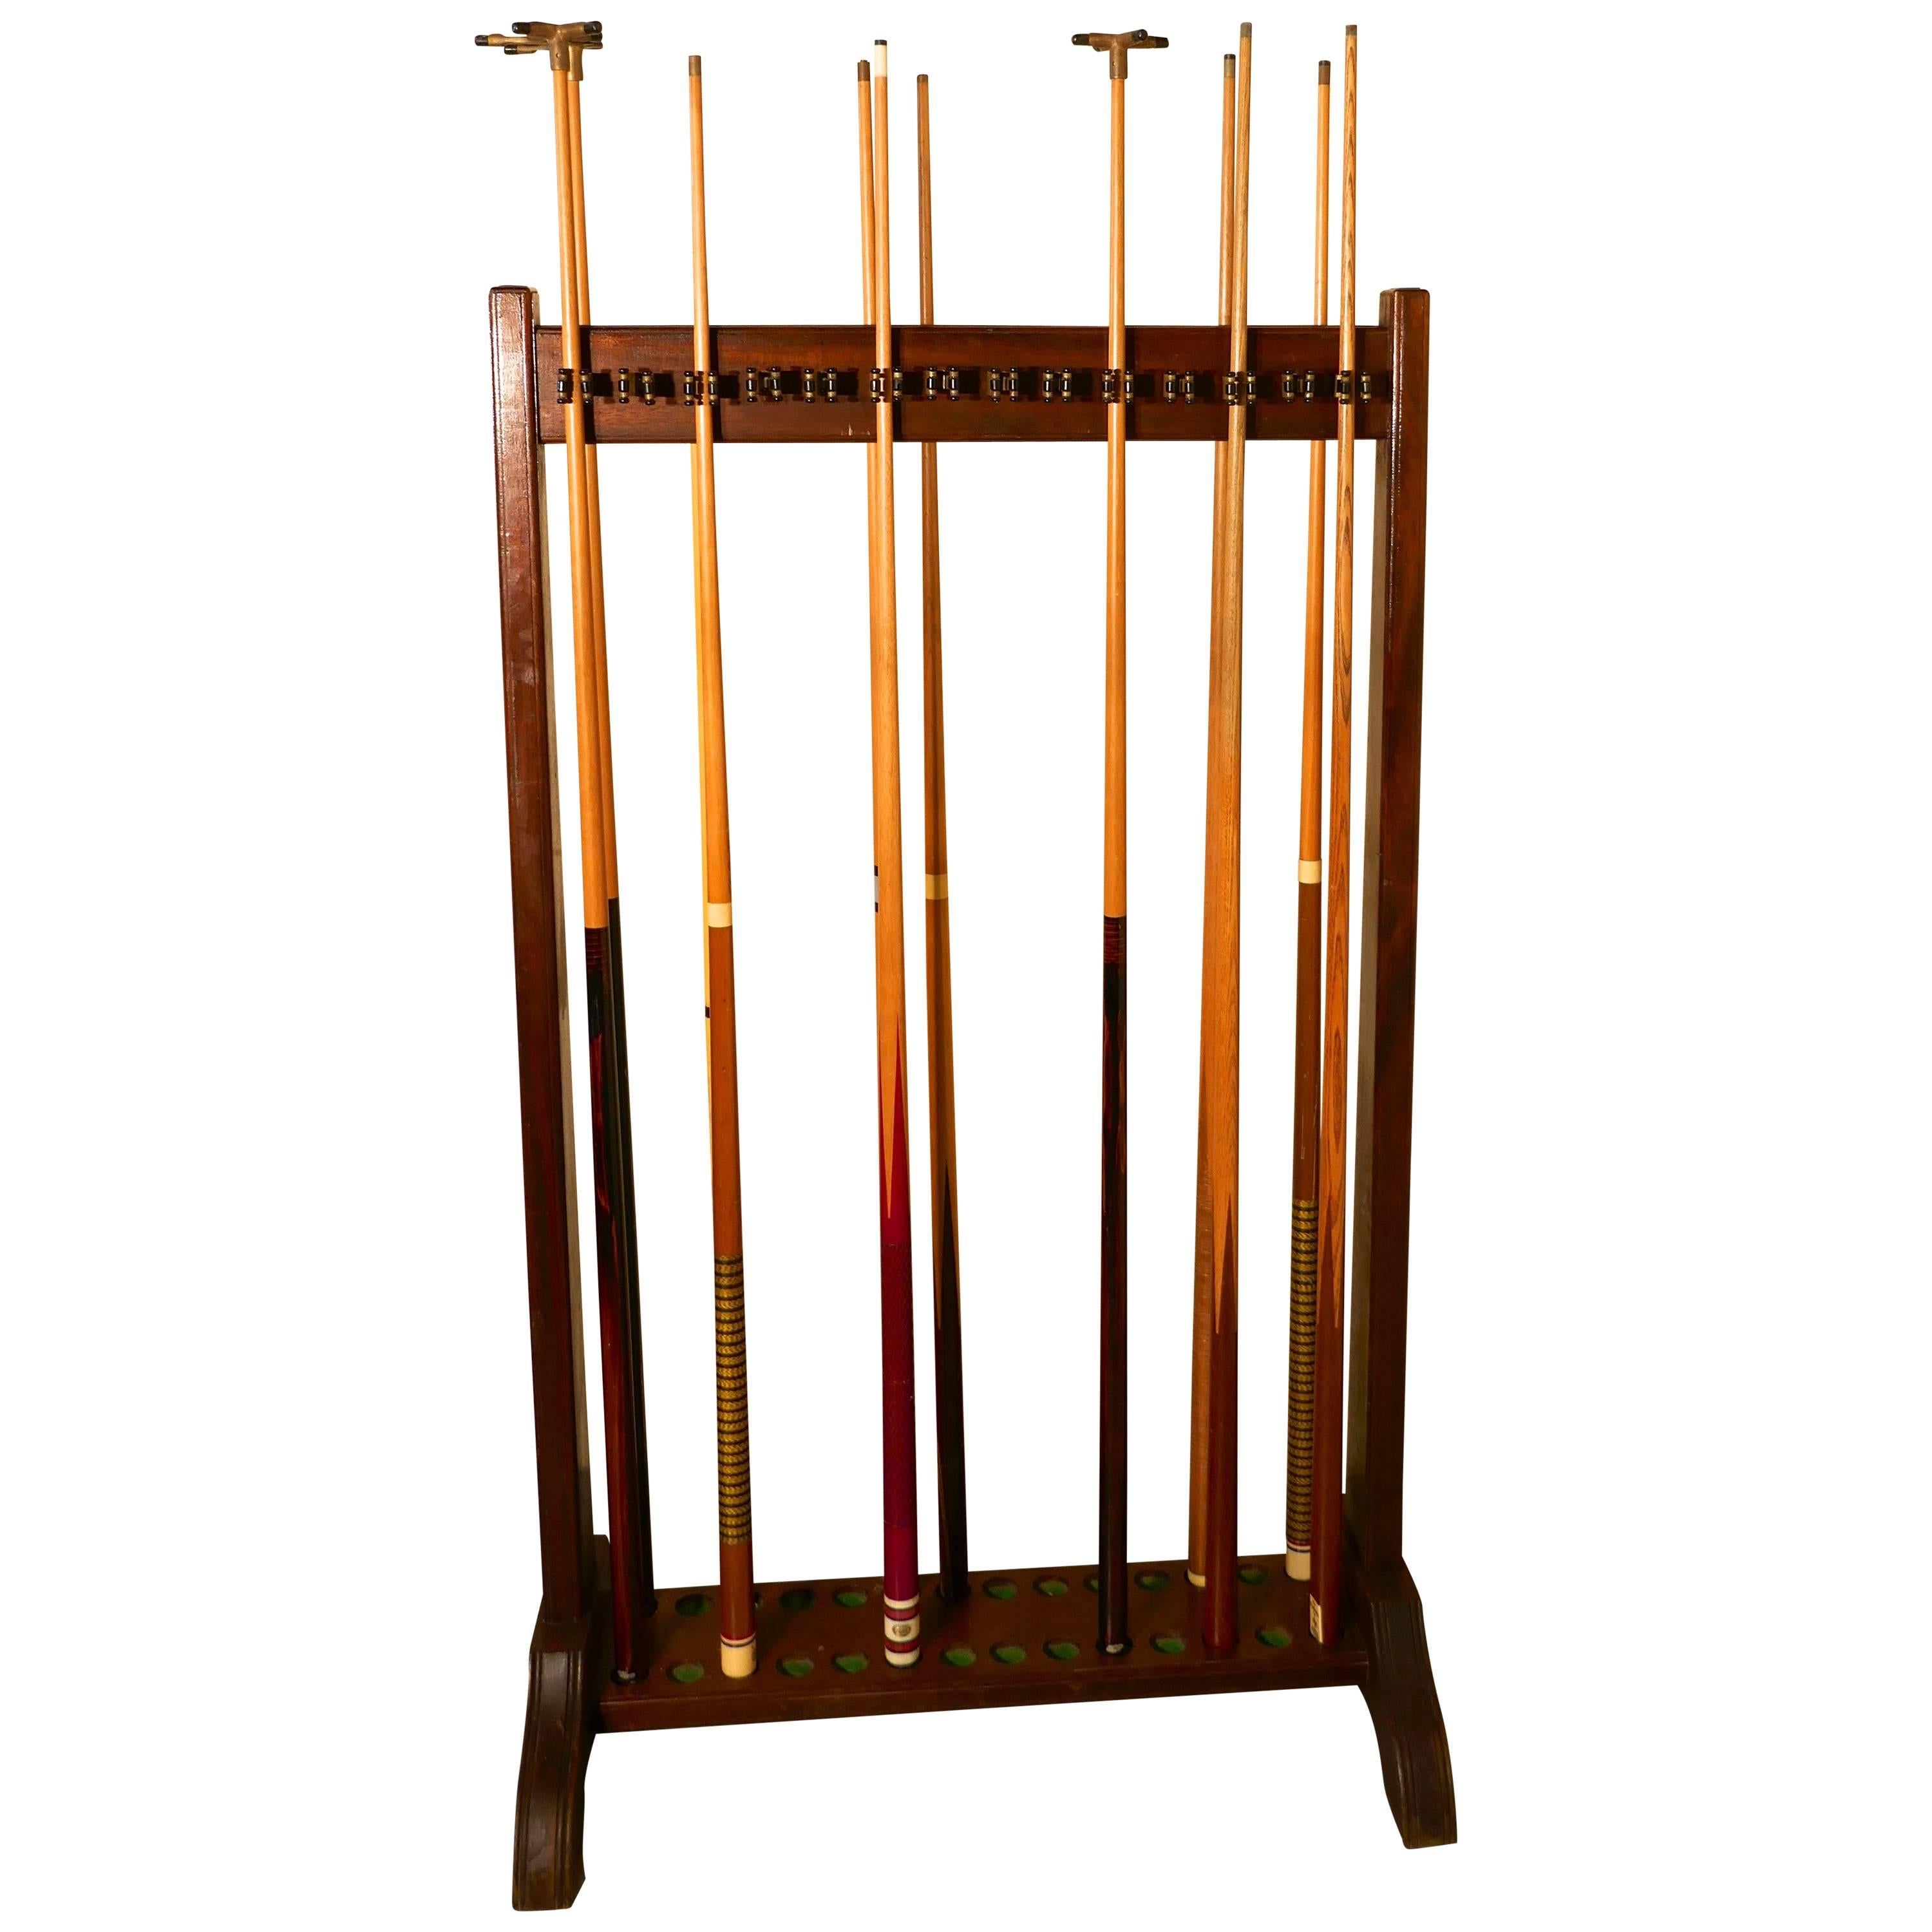 Large 19th Century Mahogany 28 Snooker Cue Rack and Cues